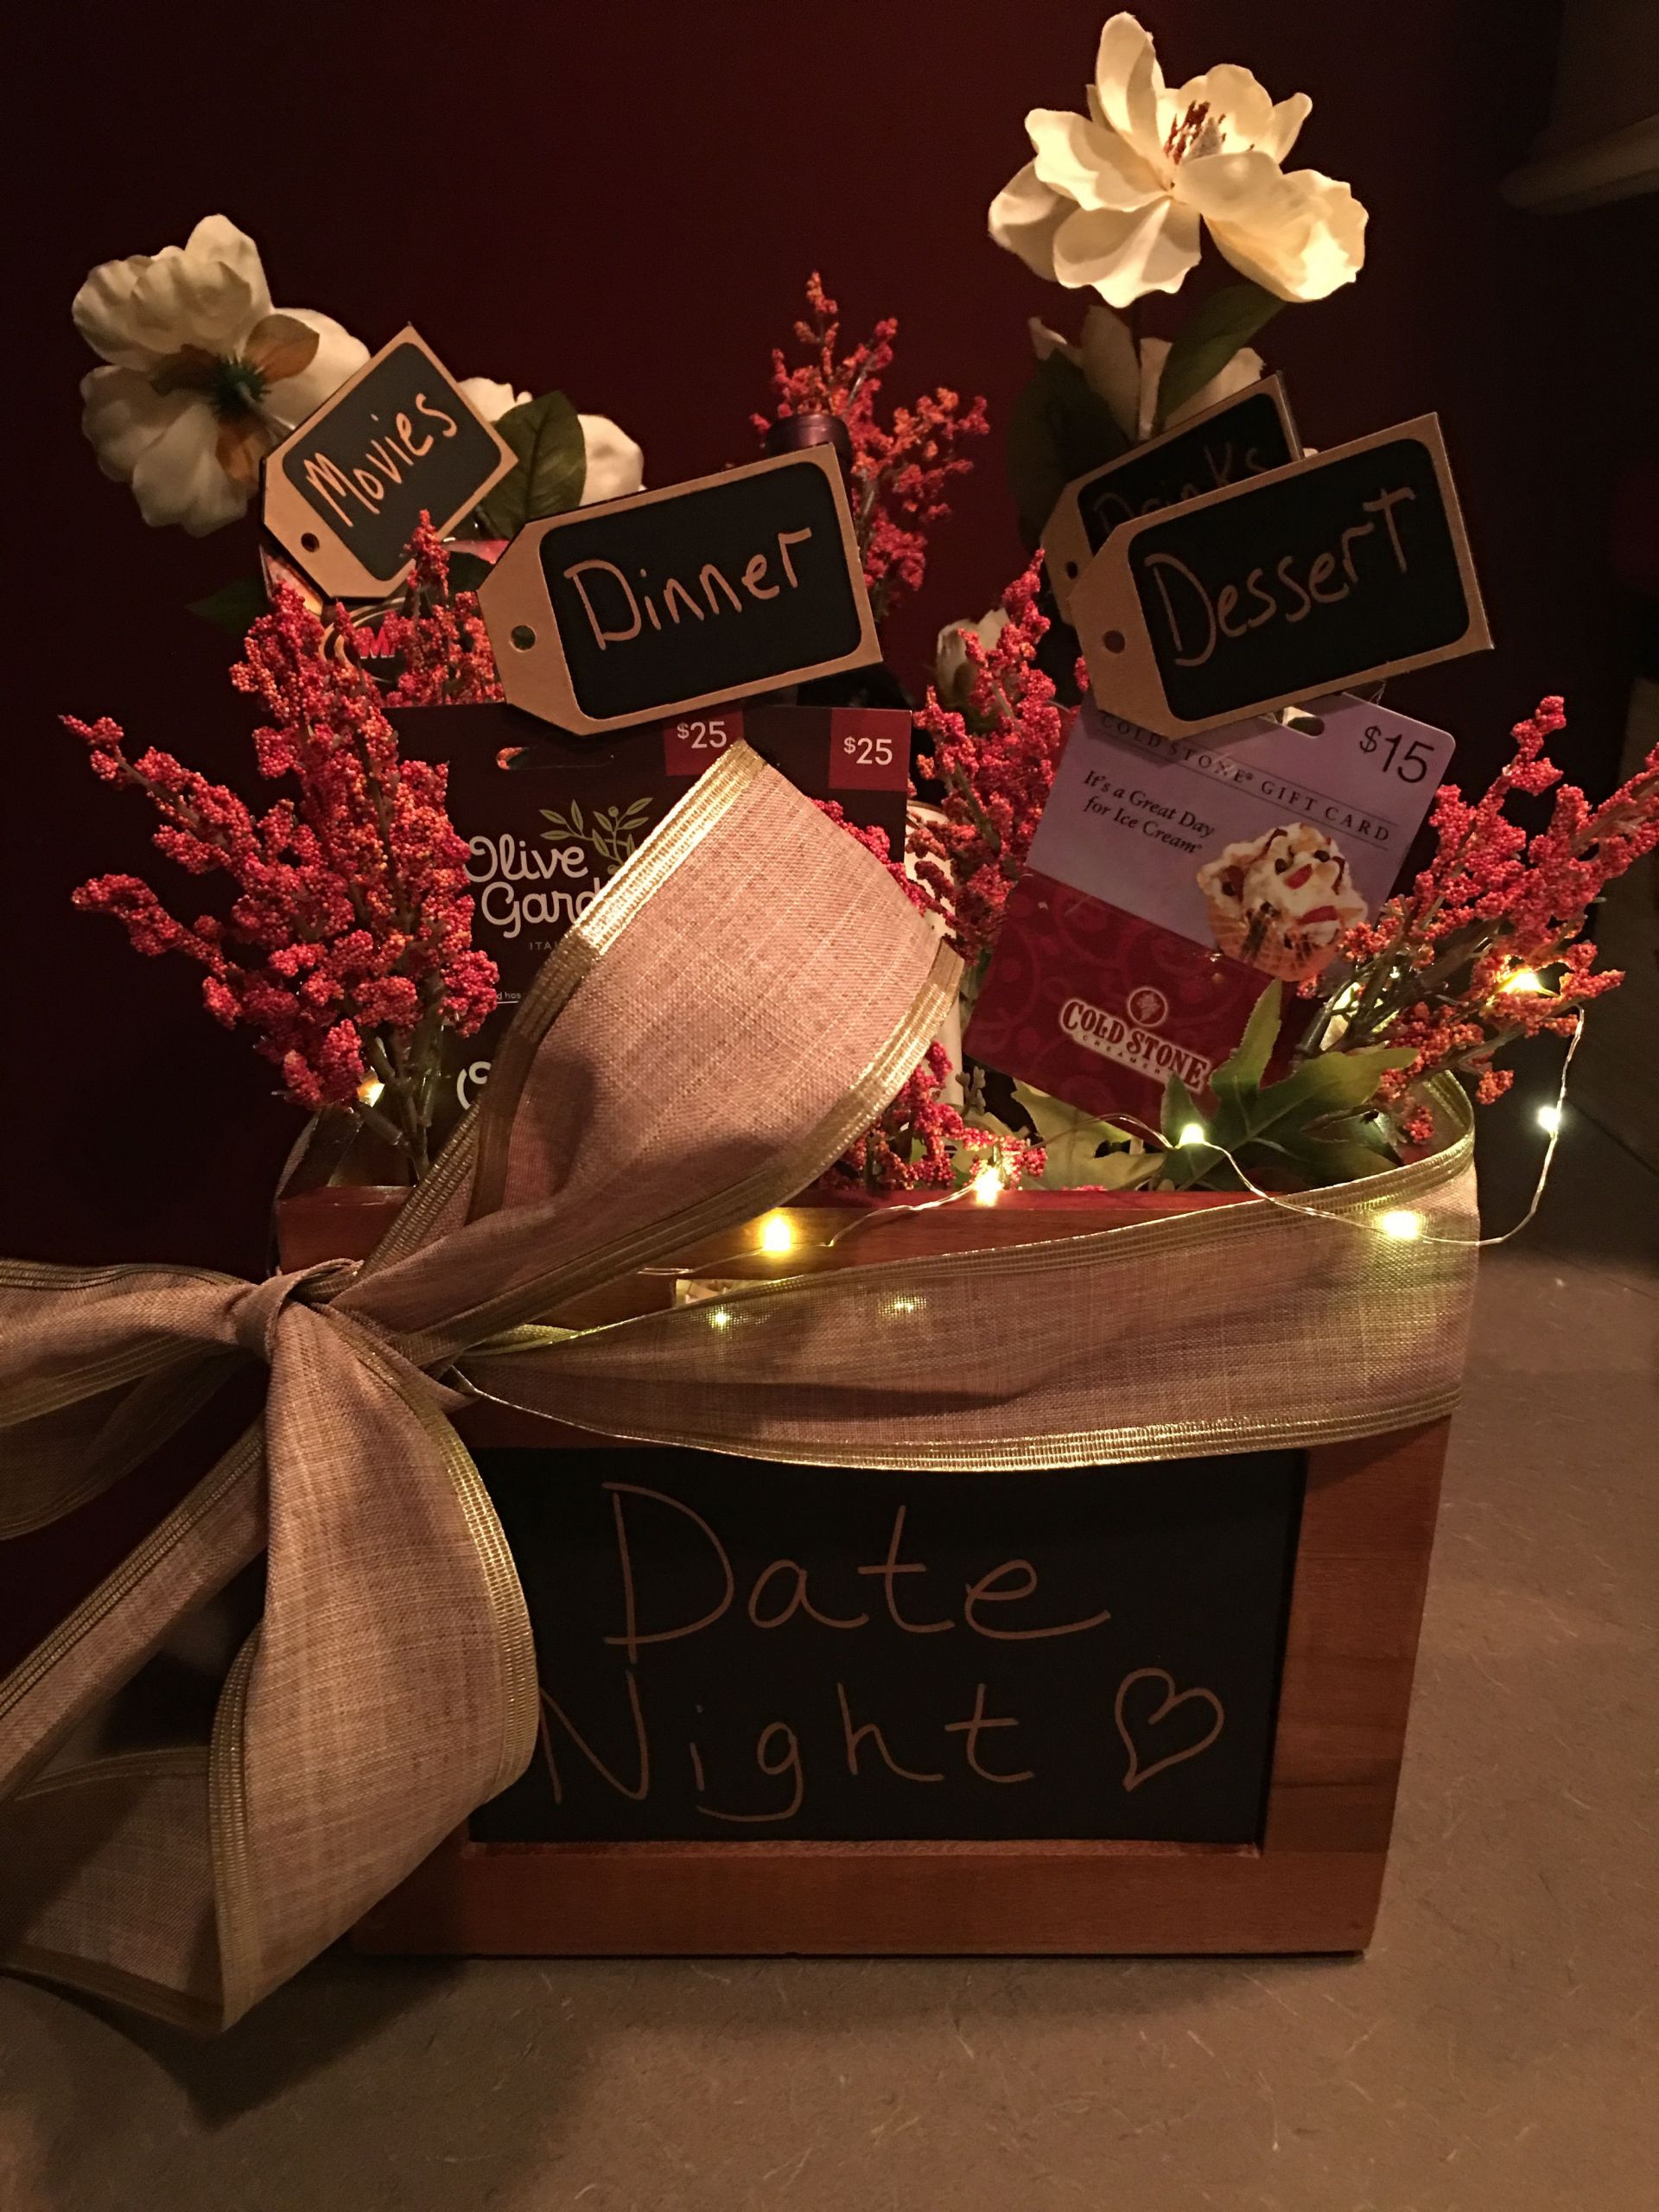 Wedding Gift Ideas For Young Couples
 Date night t basket